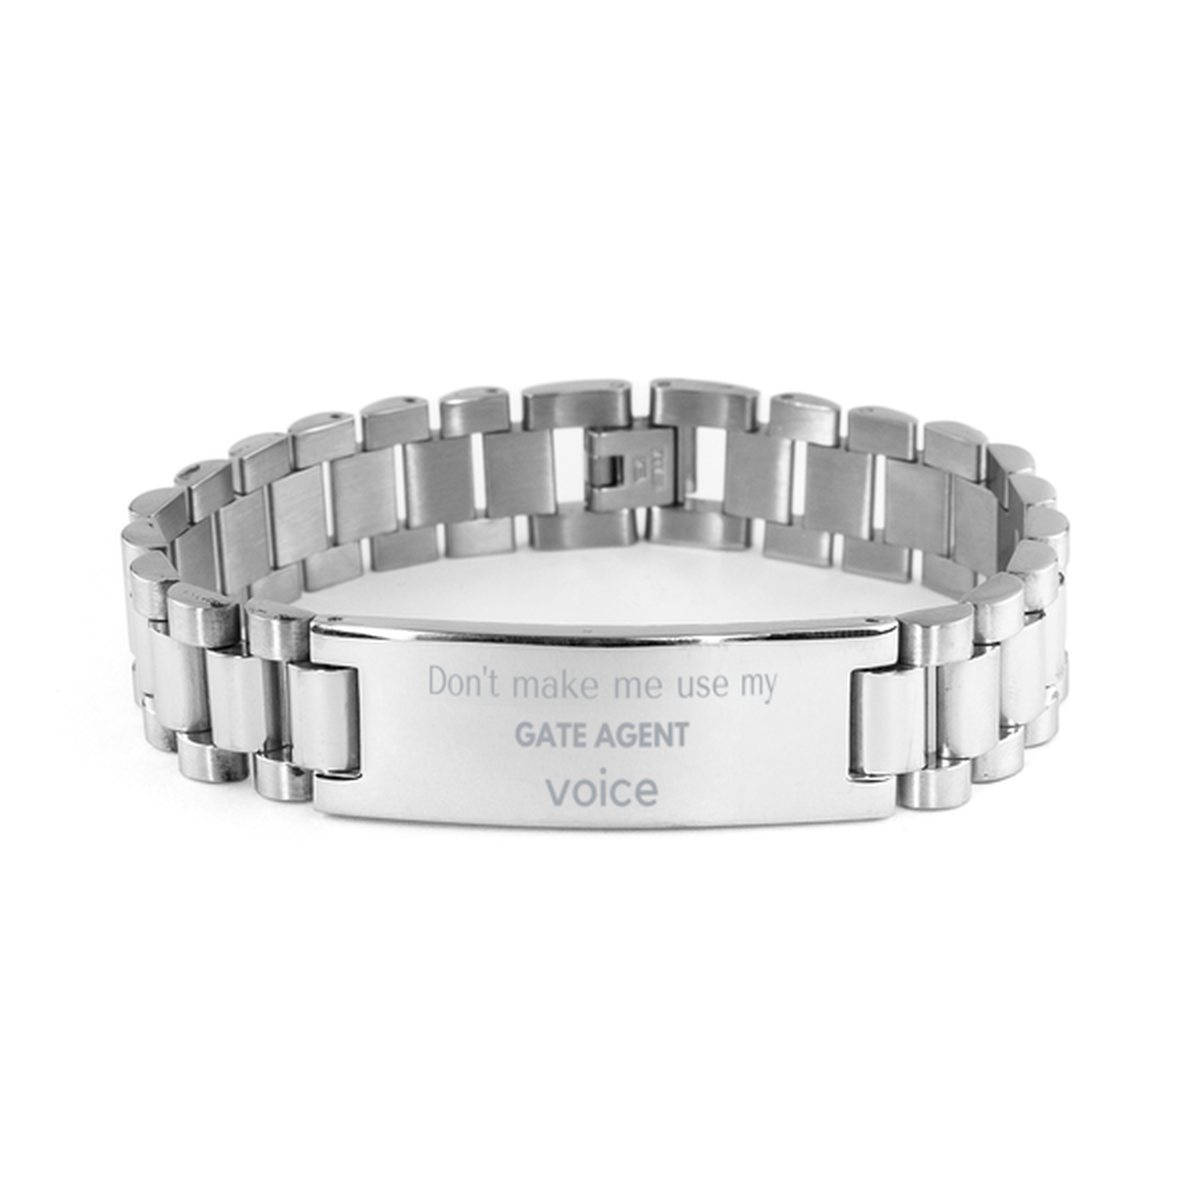 Don't make me use my Gate Agent voice, Sarcasm Gate Agent Gifts, Christmas Gate Agent Ladder Stainless Steel Bracelet Birthday Unique Gifts For Gate Agent Coworkers, Men, Women, Colleague, Friends